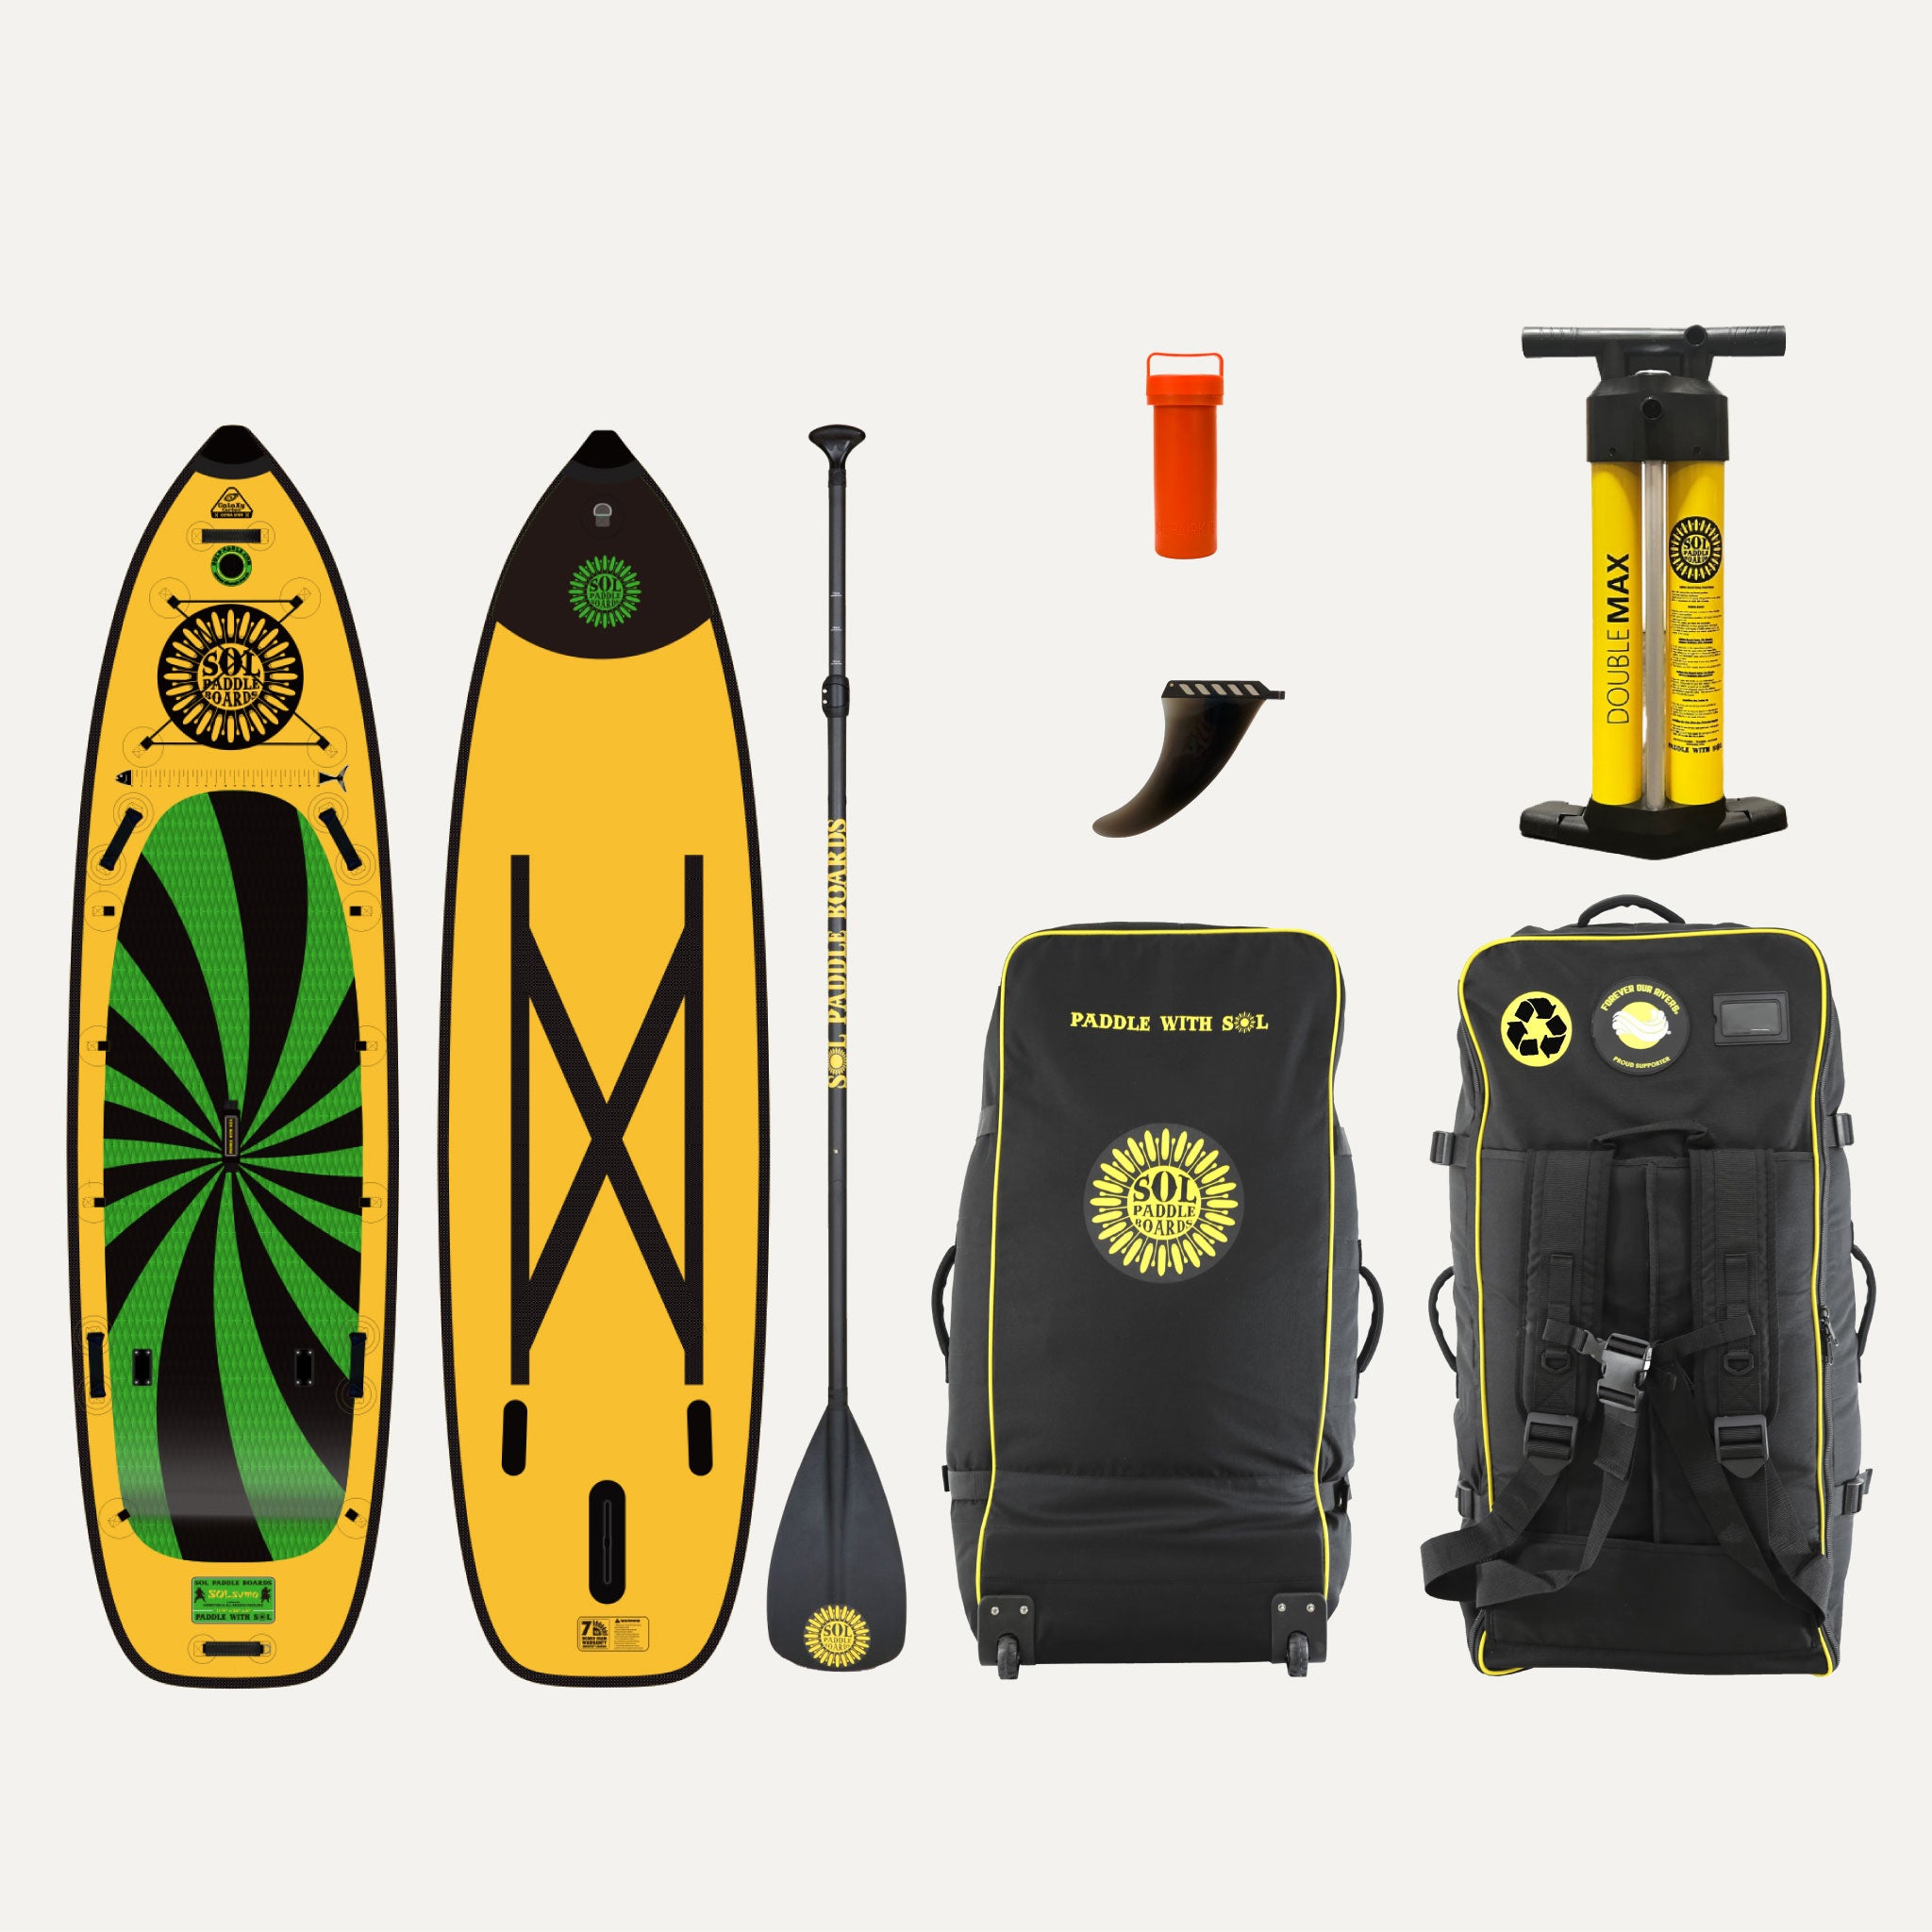 Carbon GalaXy SOLsumo Inflatable Paddle Board showcasing the top and bottom views of the SUP board and the accessories that come with it